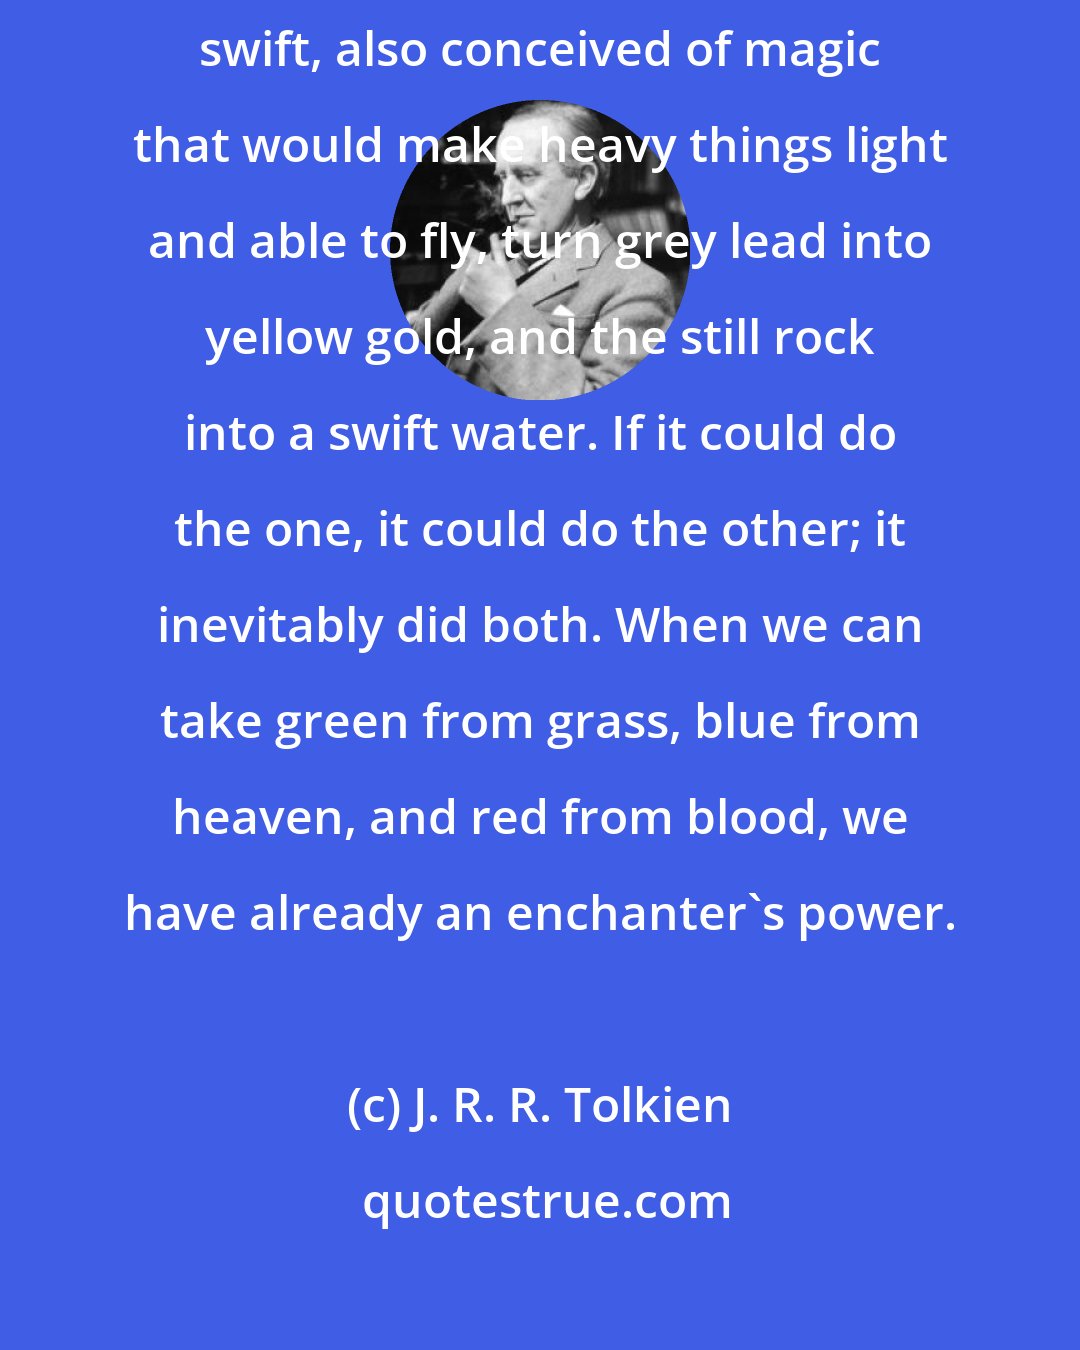 J. R. R. Tolkien: The mind that thought of light, heavy, grey, yellow, still, swift, also conceived of magic that would make heavy things light and able to fly, turn grey lead into yellow gold, and the still rock into a swift water. If it could do the one, it could do the other; it inevitably did both. When we can take green from grass, blue from heaven, and red from blood, we have already an enchanter's power.